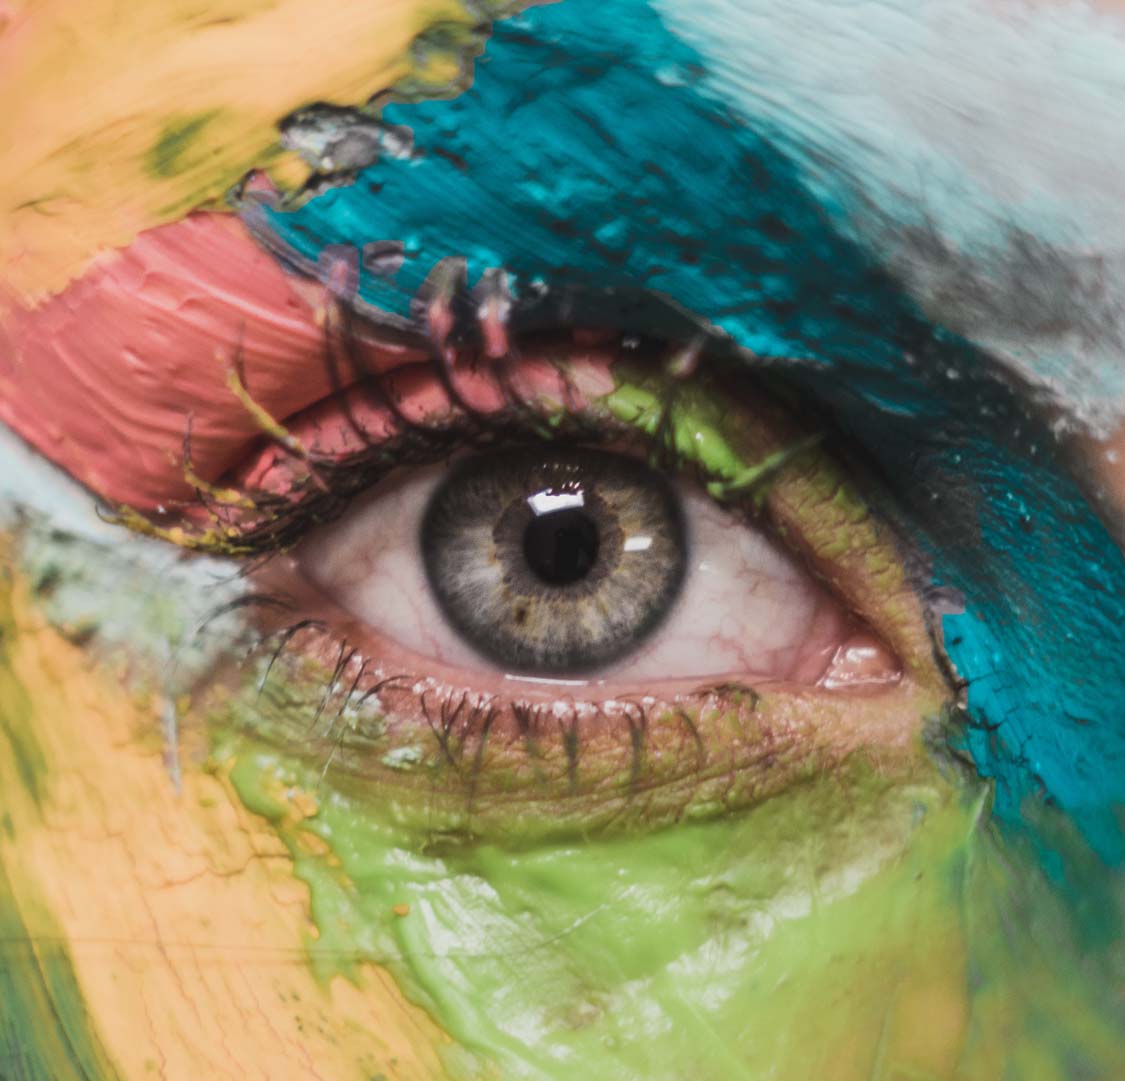 you: a close up of a human eye. The face is painted various vibrant colours suggesting individuality.